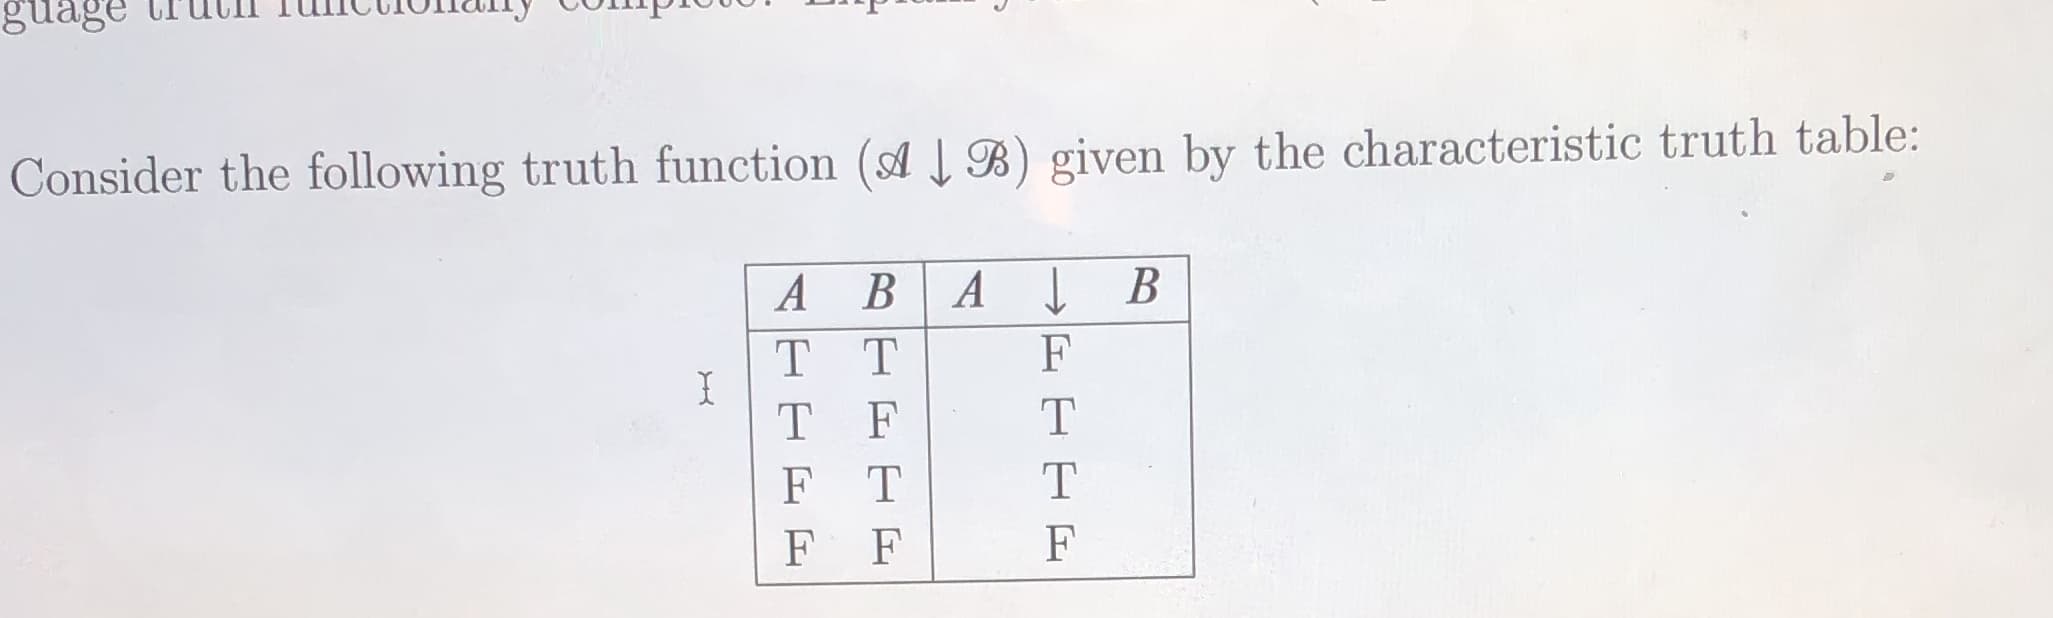 Consider the following truth function (A B) given by the characteristic truth table:
А ВА
тт
F
T F
F T
F F
F
